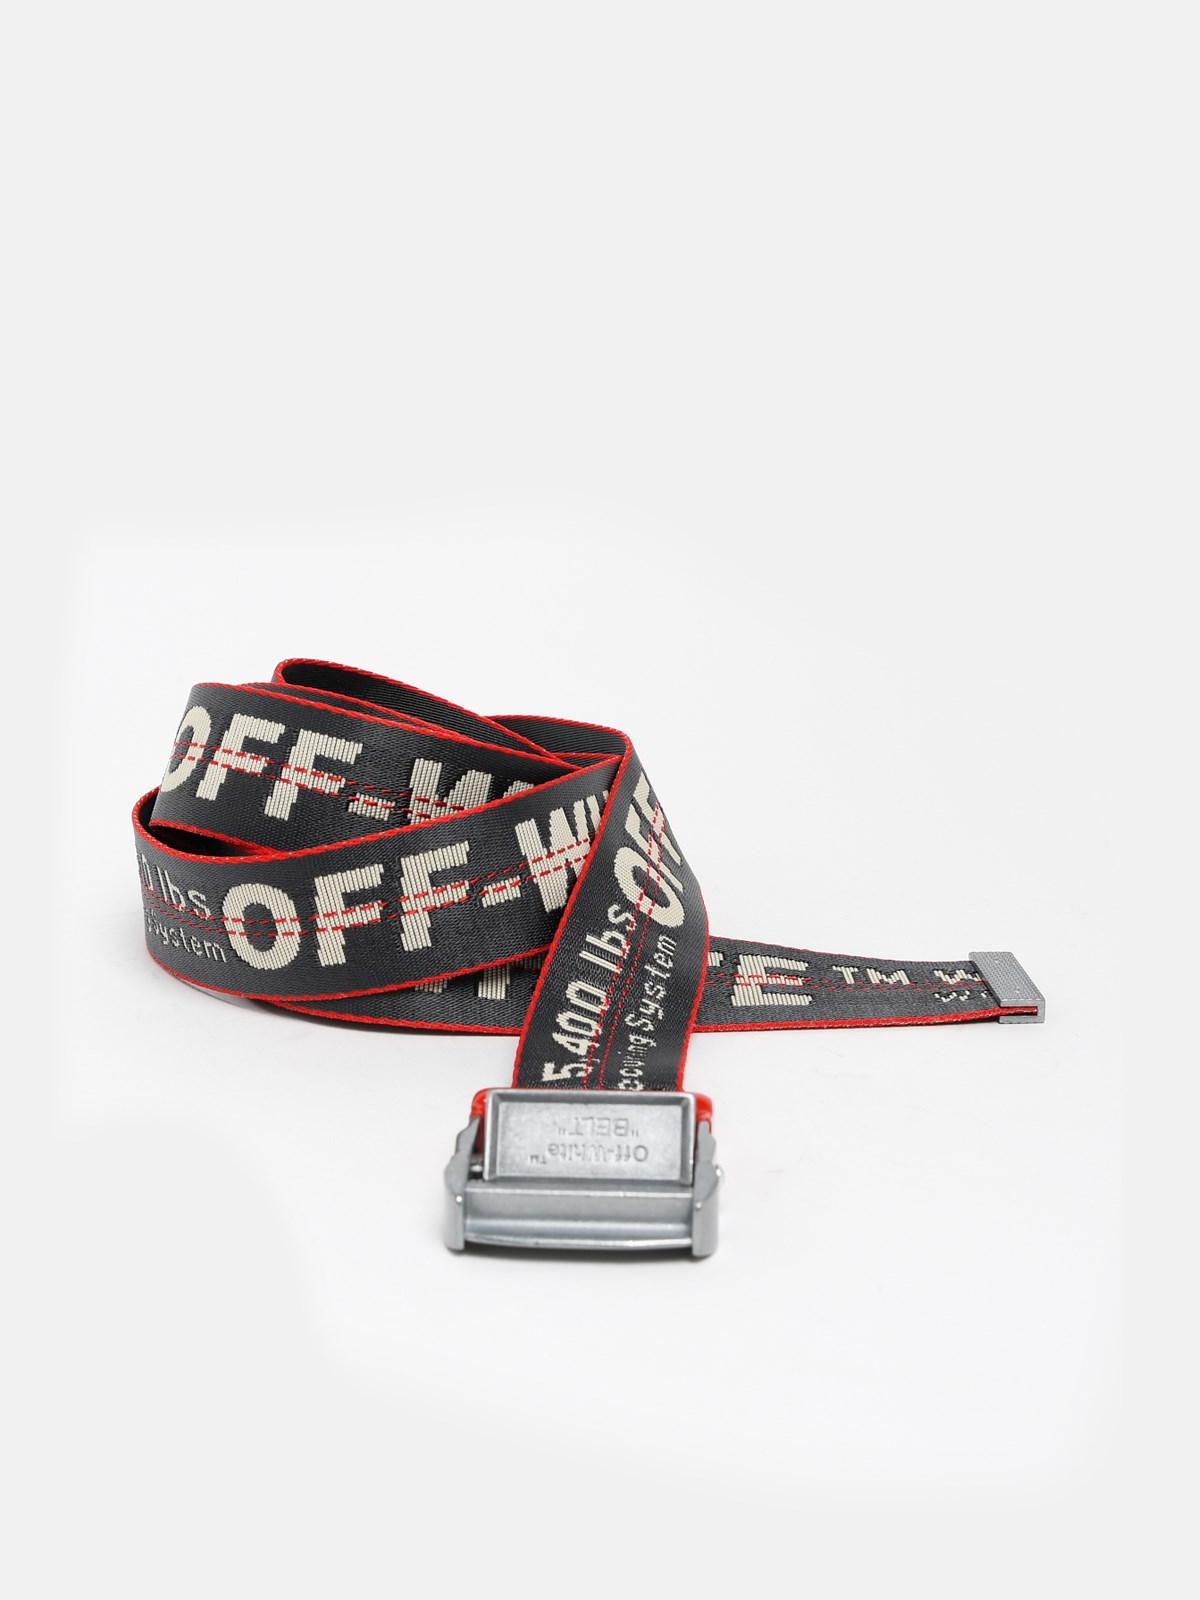 Off-White c/o Virgil Abloh Synthetic Black And Red Industrial Belt for Men  - Lyst